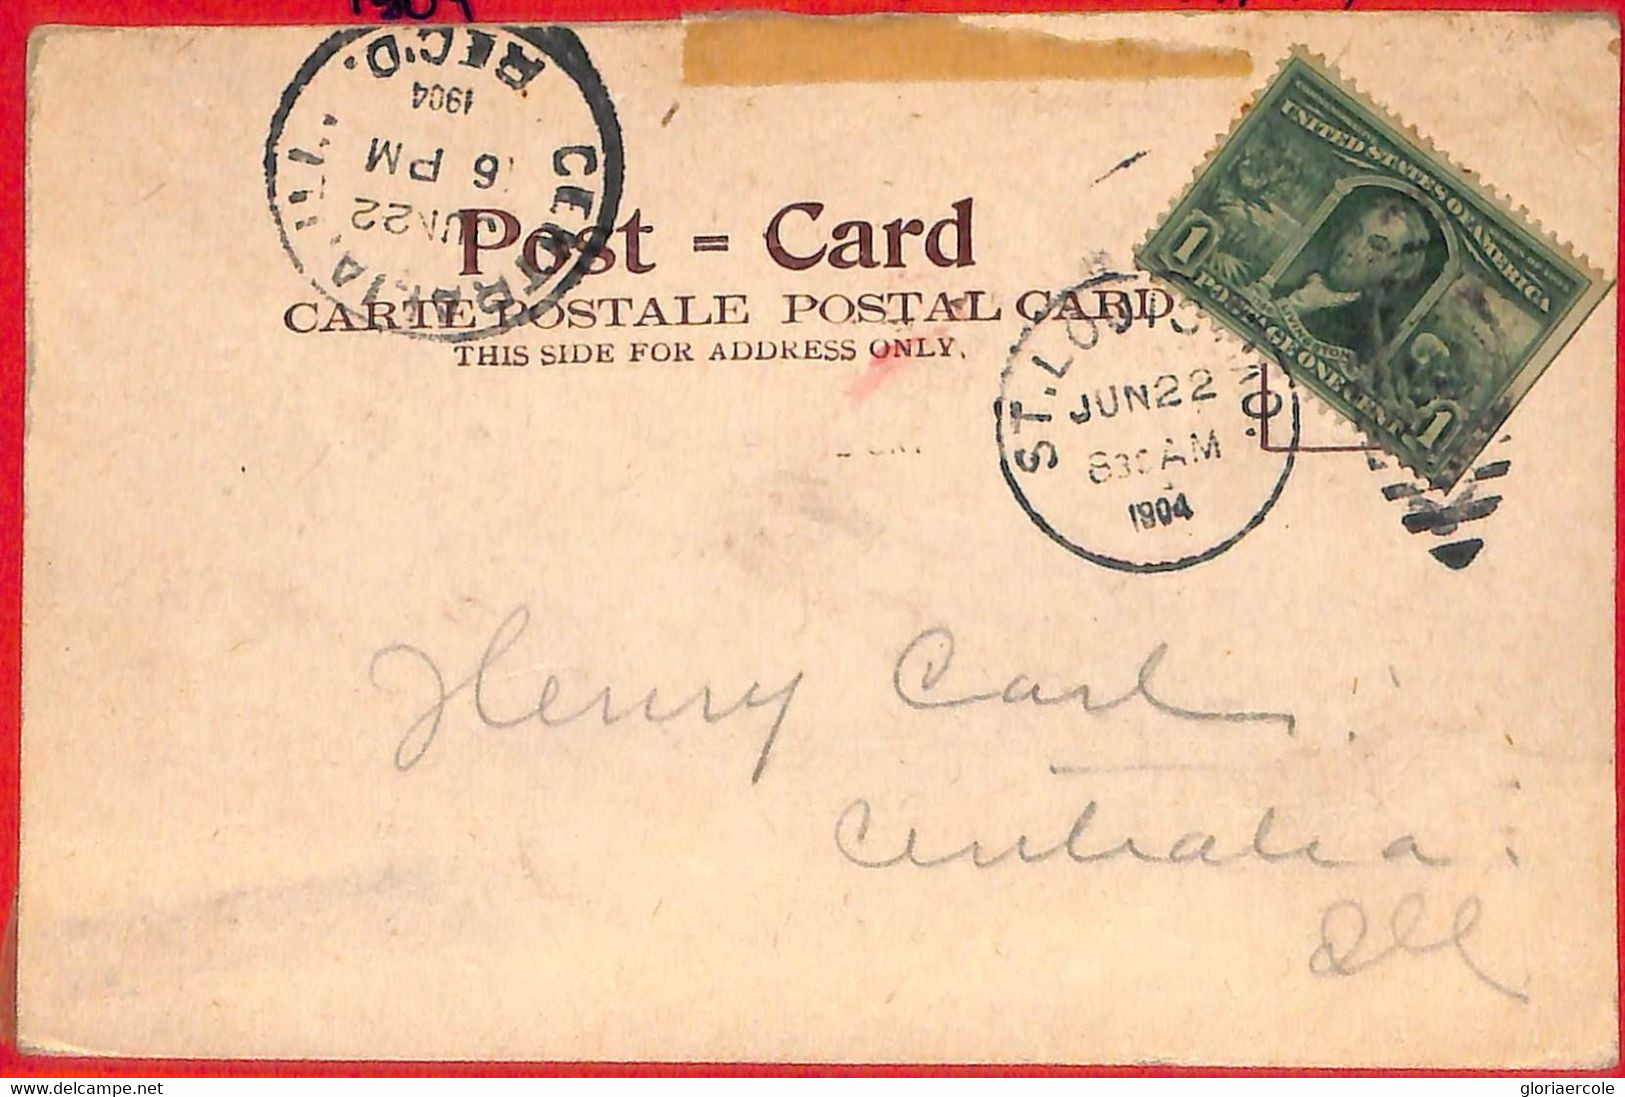 Aa2569 - USA - POSTAL HISTORY - CARD From ST LOUIS 9 Days B4 1904 Olympic Games - Summer 1904: St. Louis